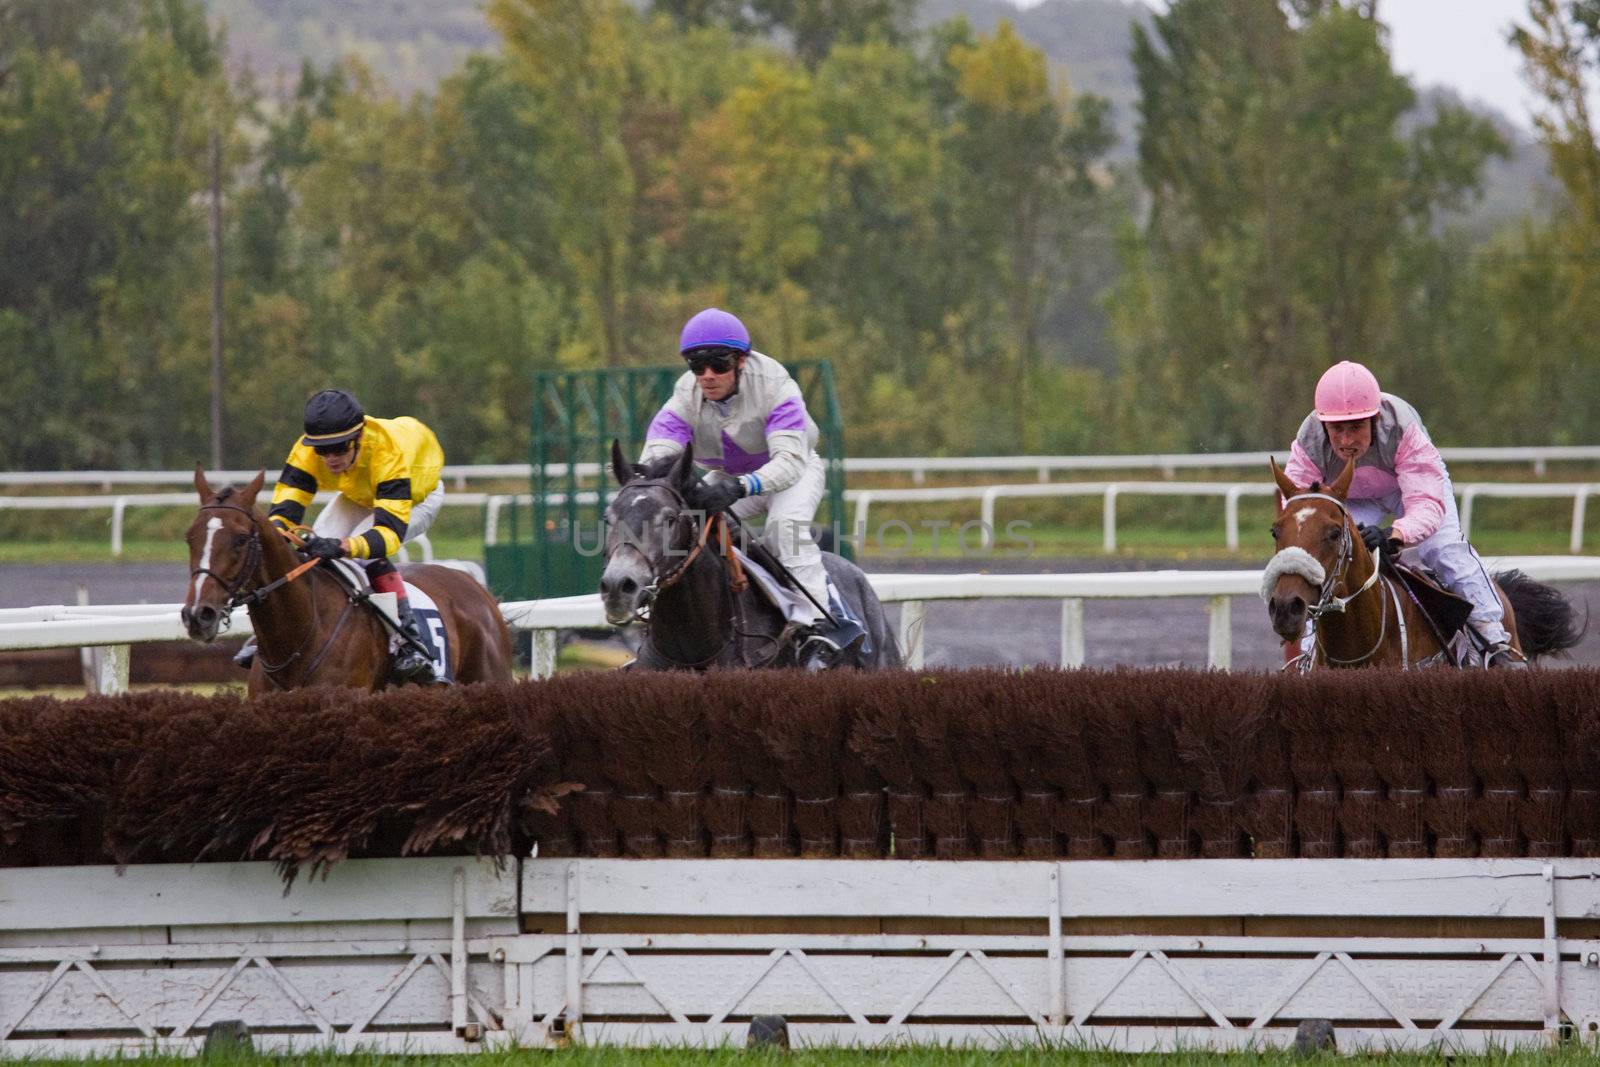 Horse Racing in France 5 by pjhpix